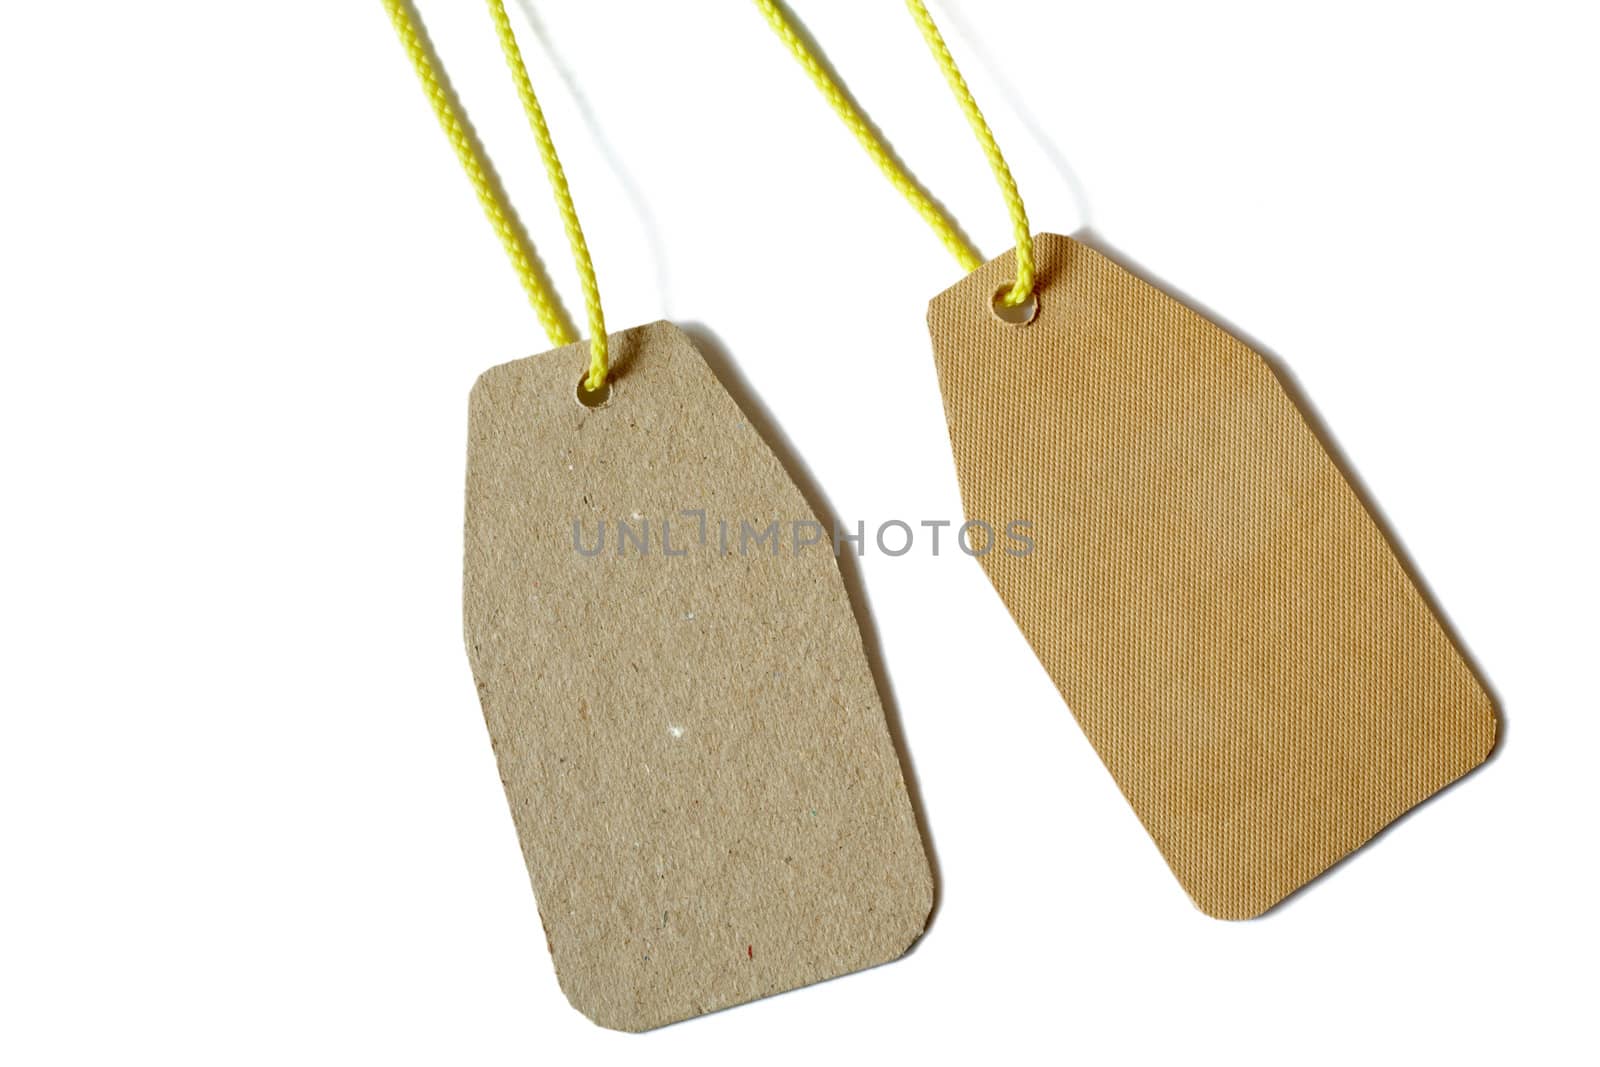 A two tags  with yellow laces